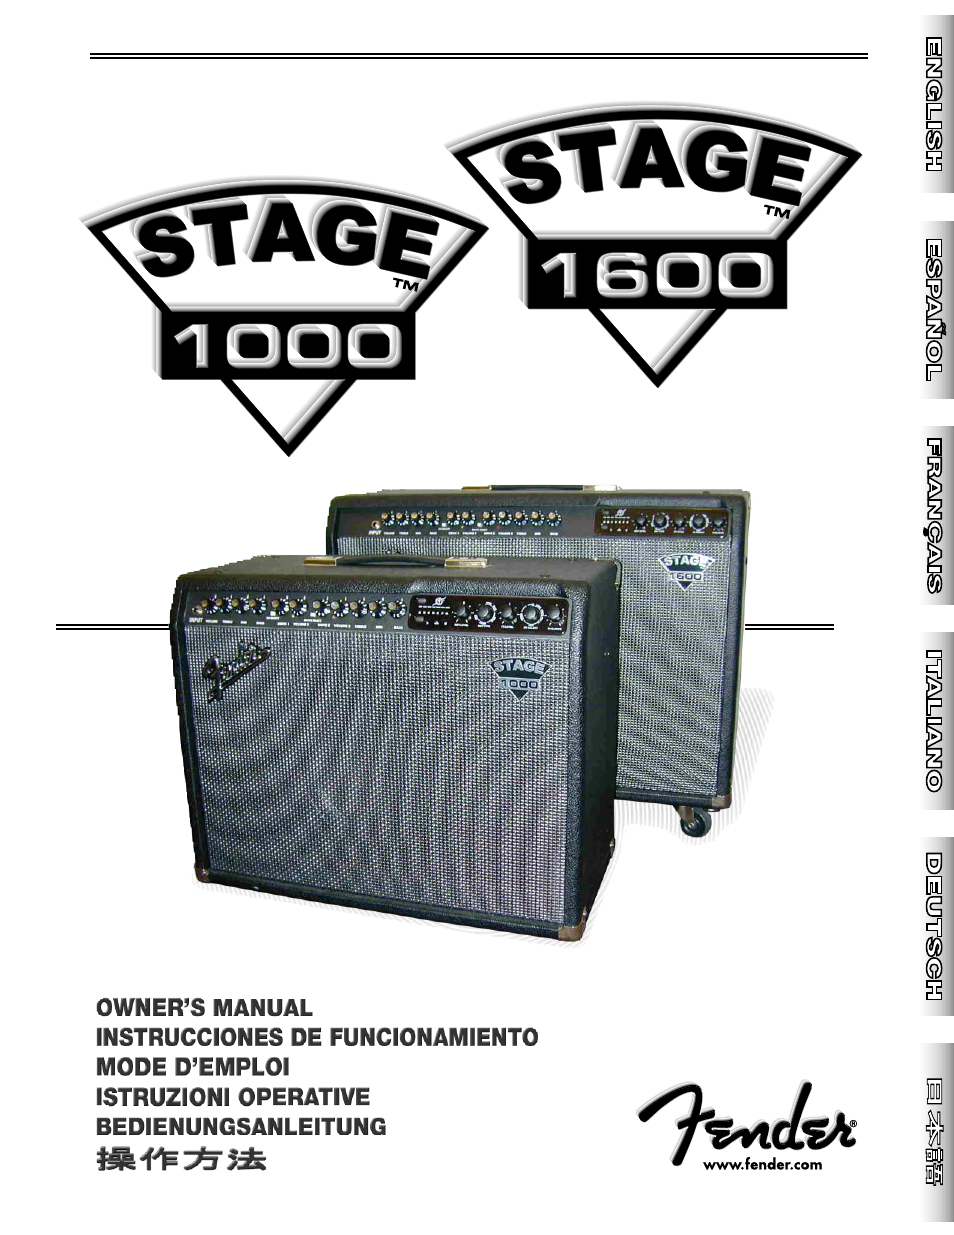 Fender Stage 1600 User Manual | 20 pages